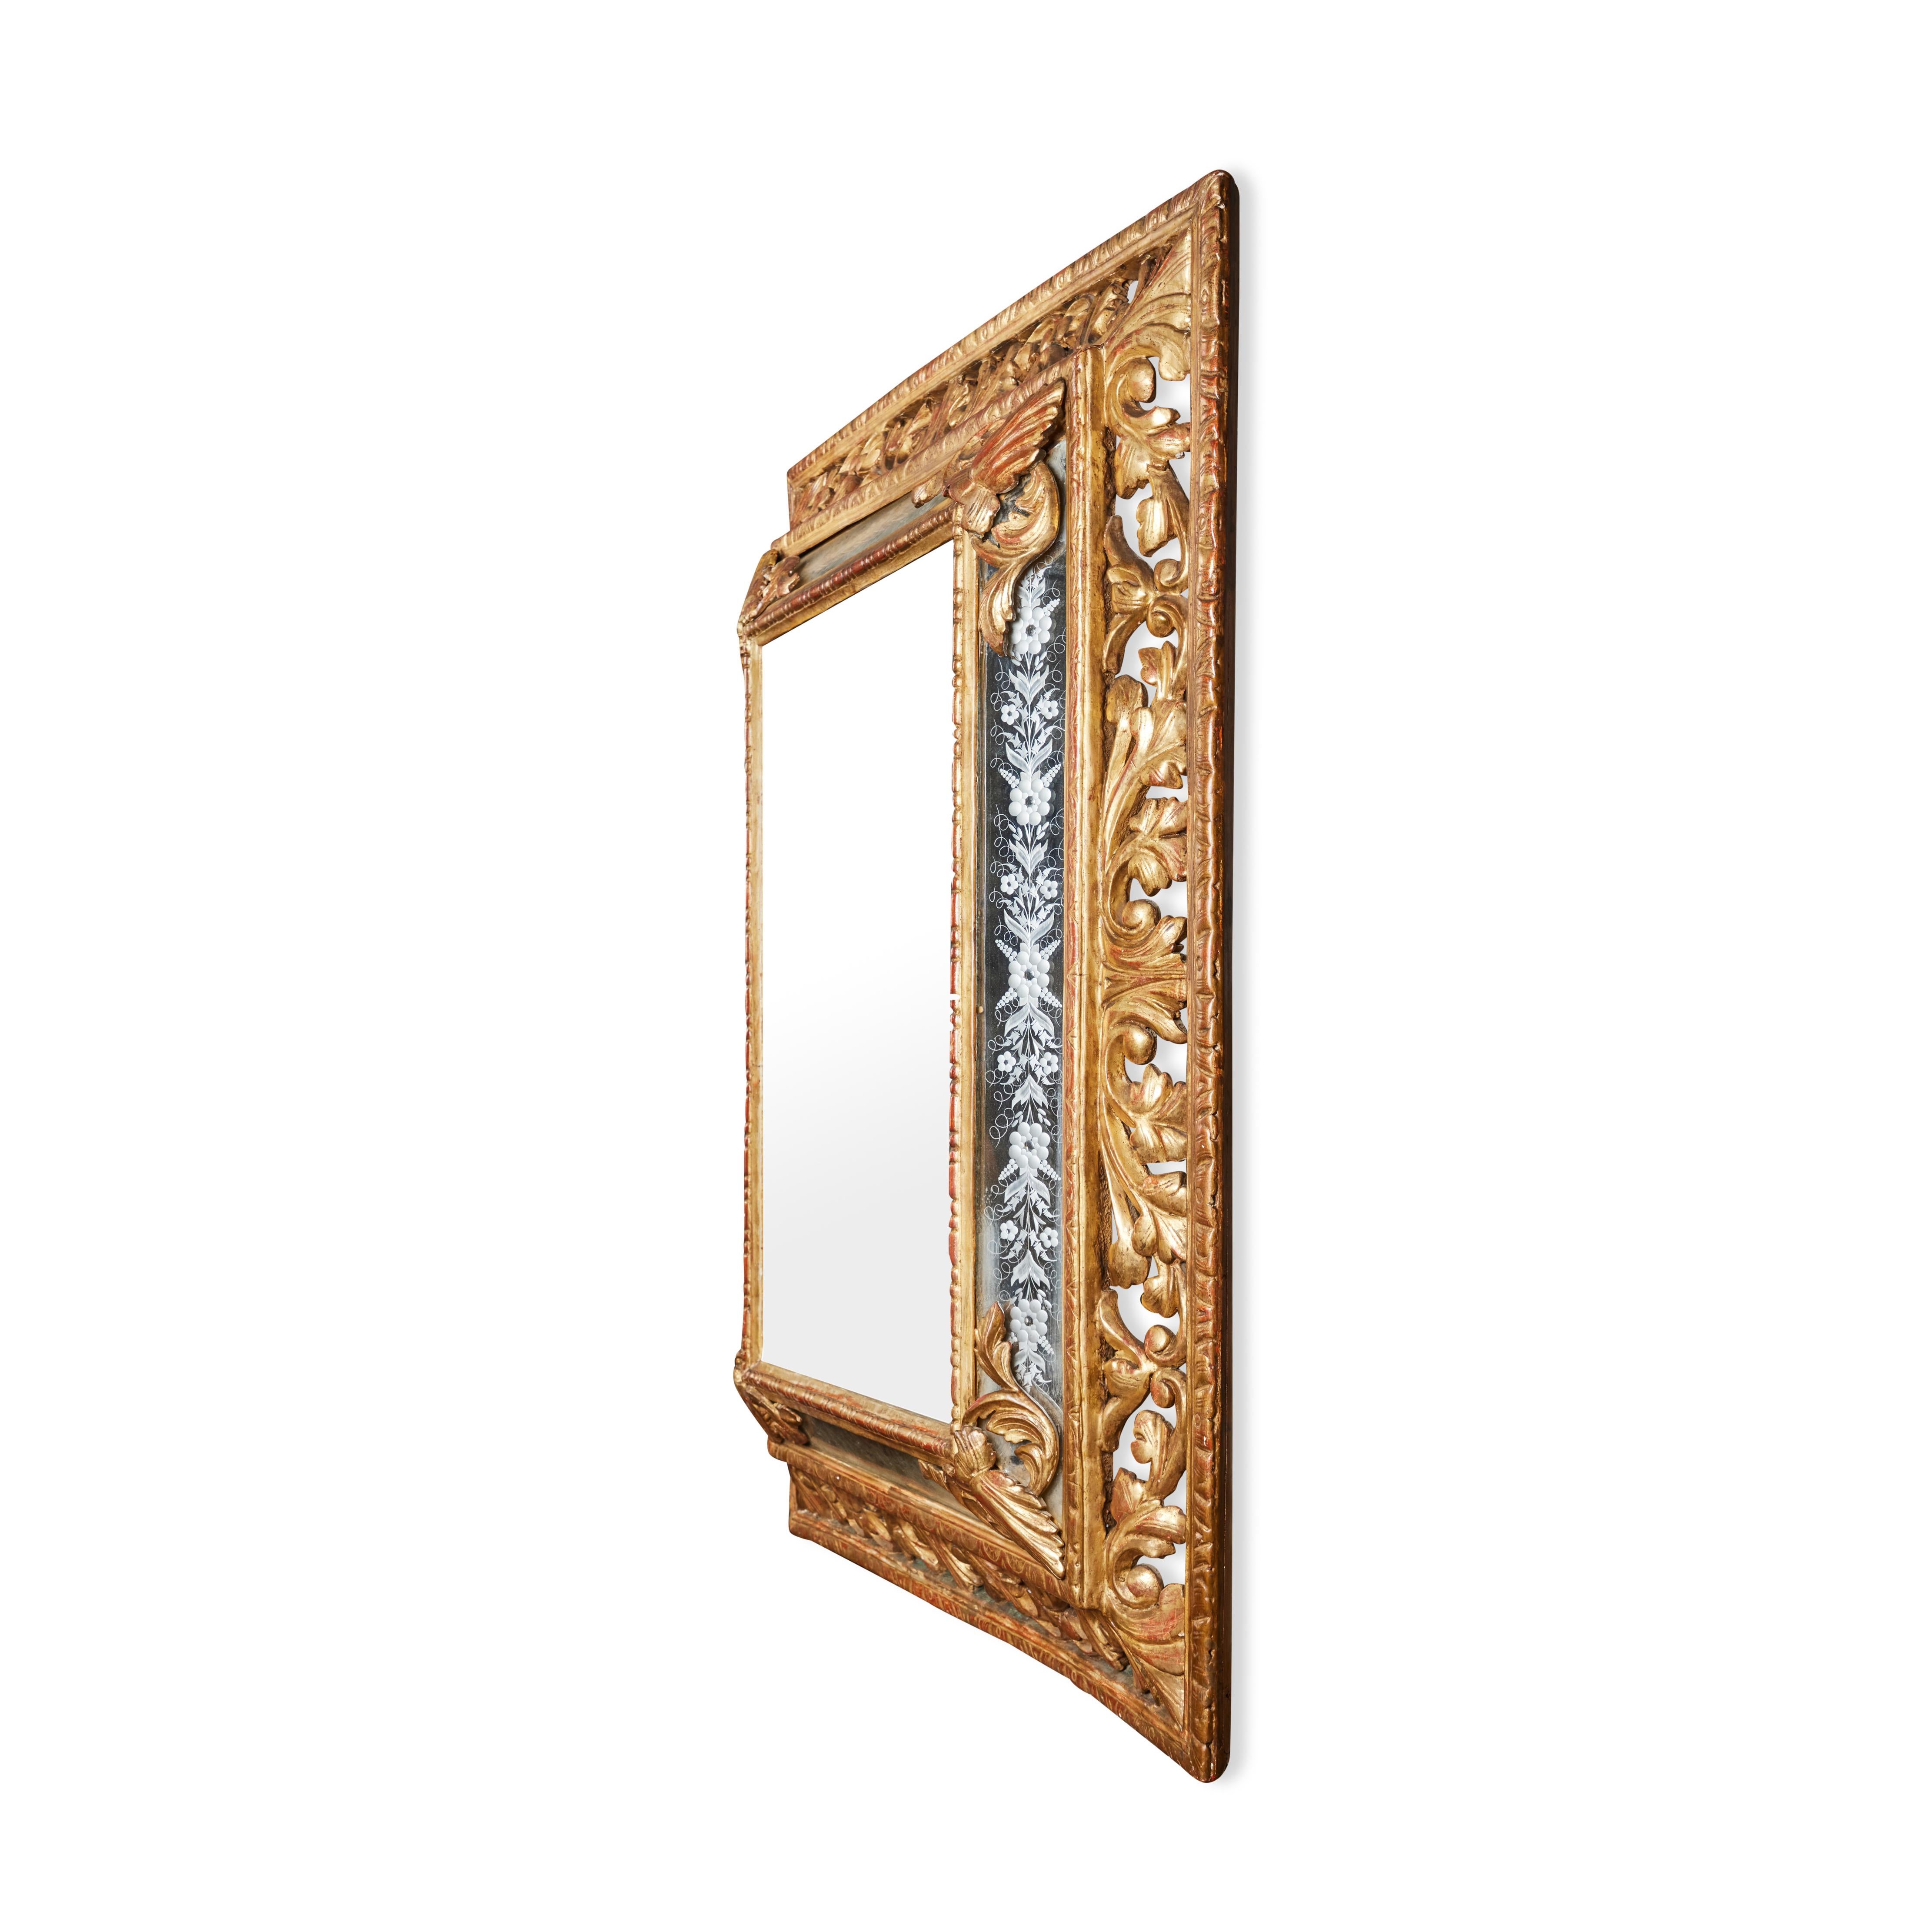 Elaborately hand carved and gilded, stepped mirror with etched glass insets featuring floral designs. 